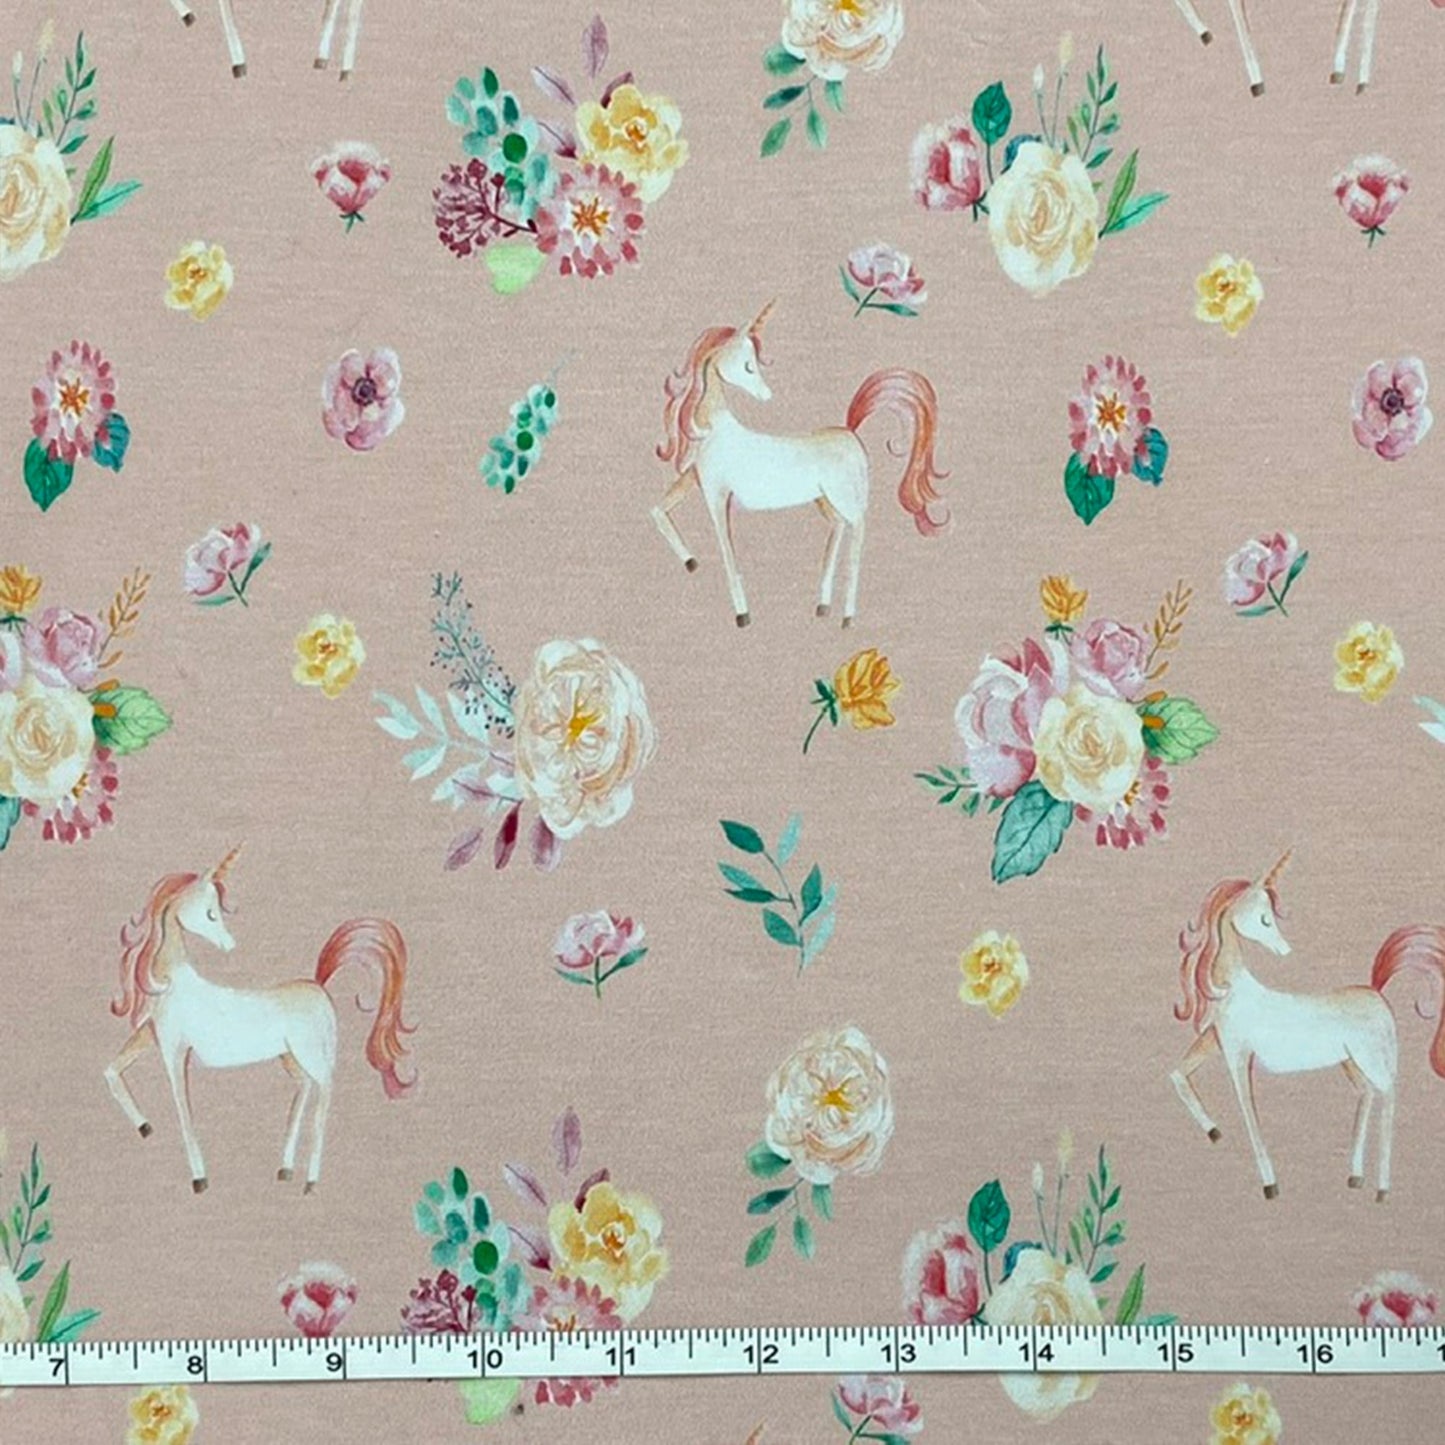 Sweet Unicorn Floral -By the 1/2 Yard - Little Rhody Sewing Co.